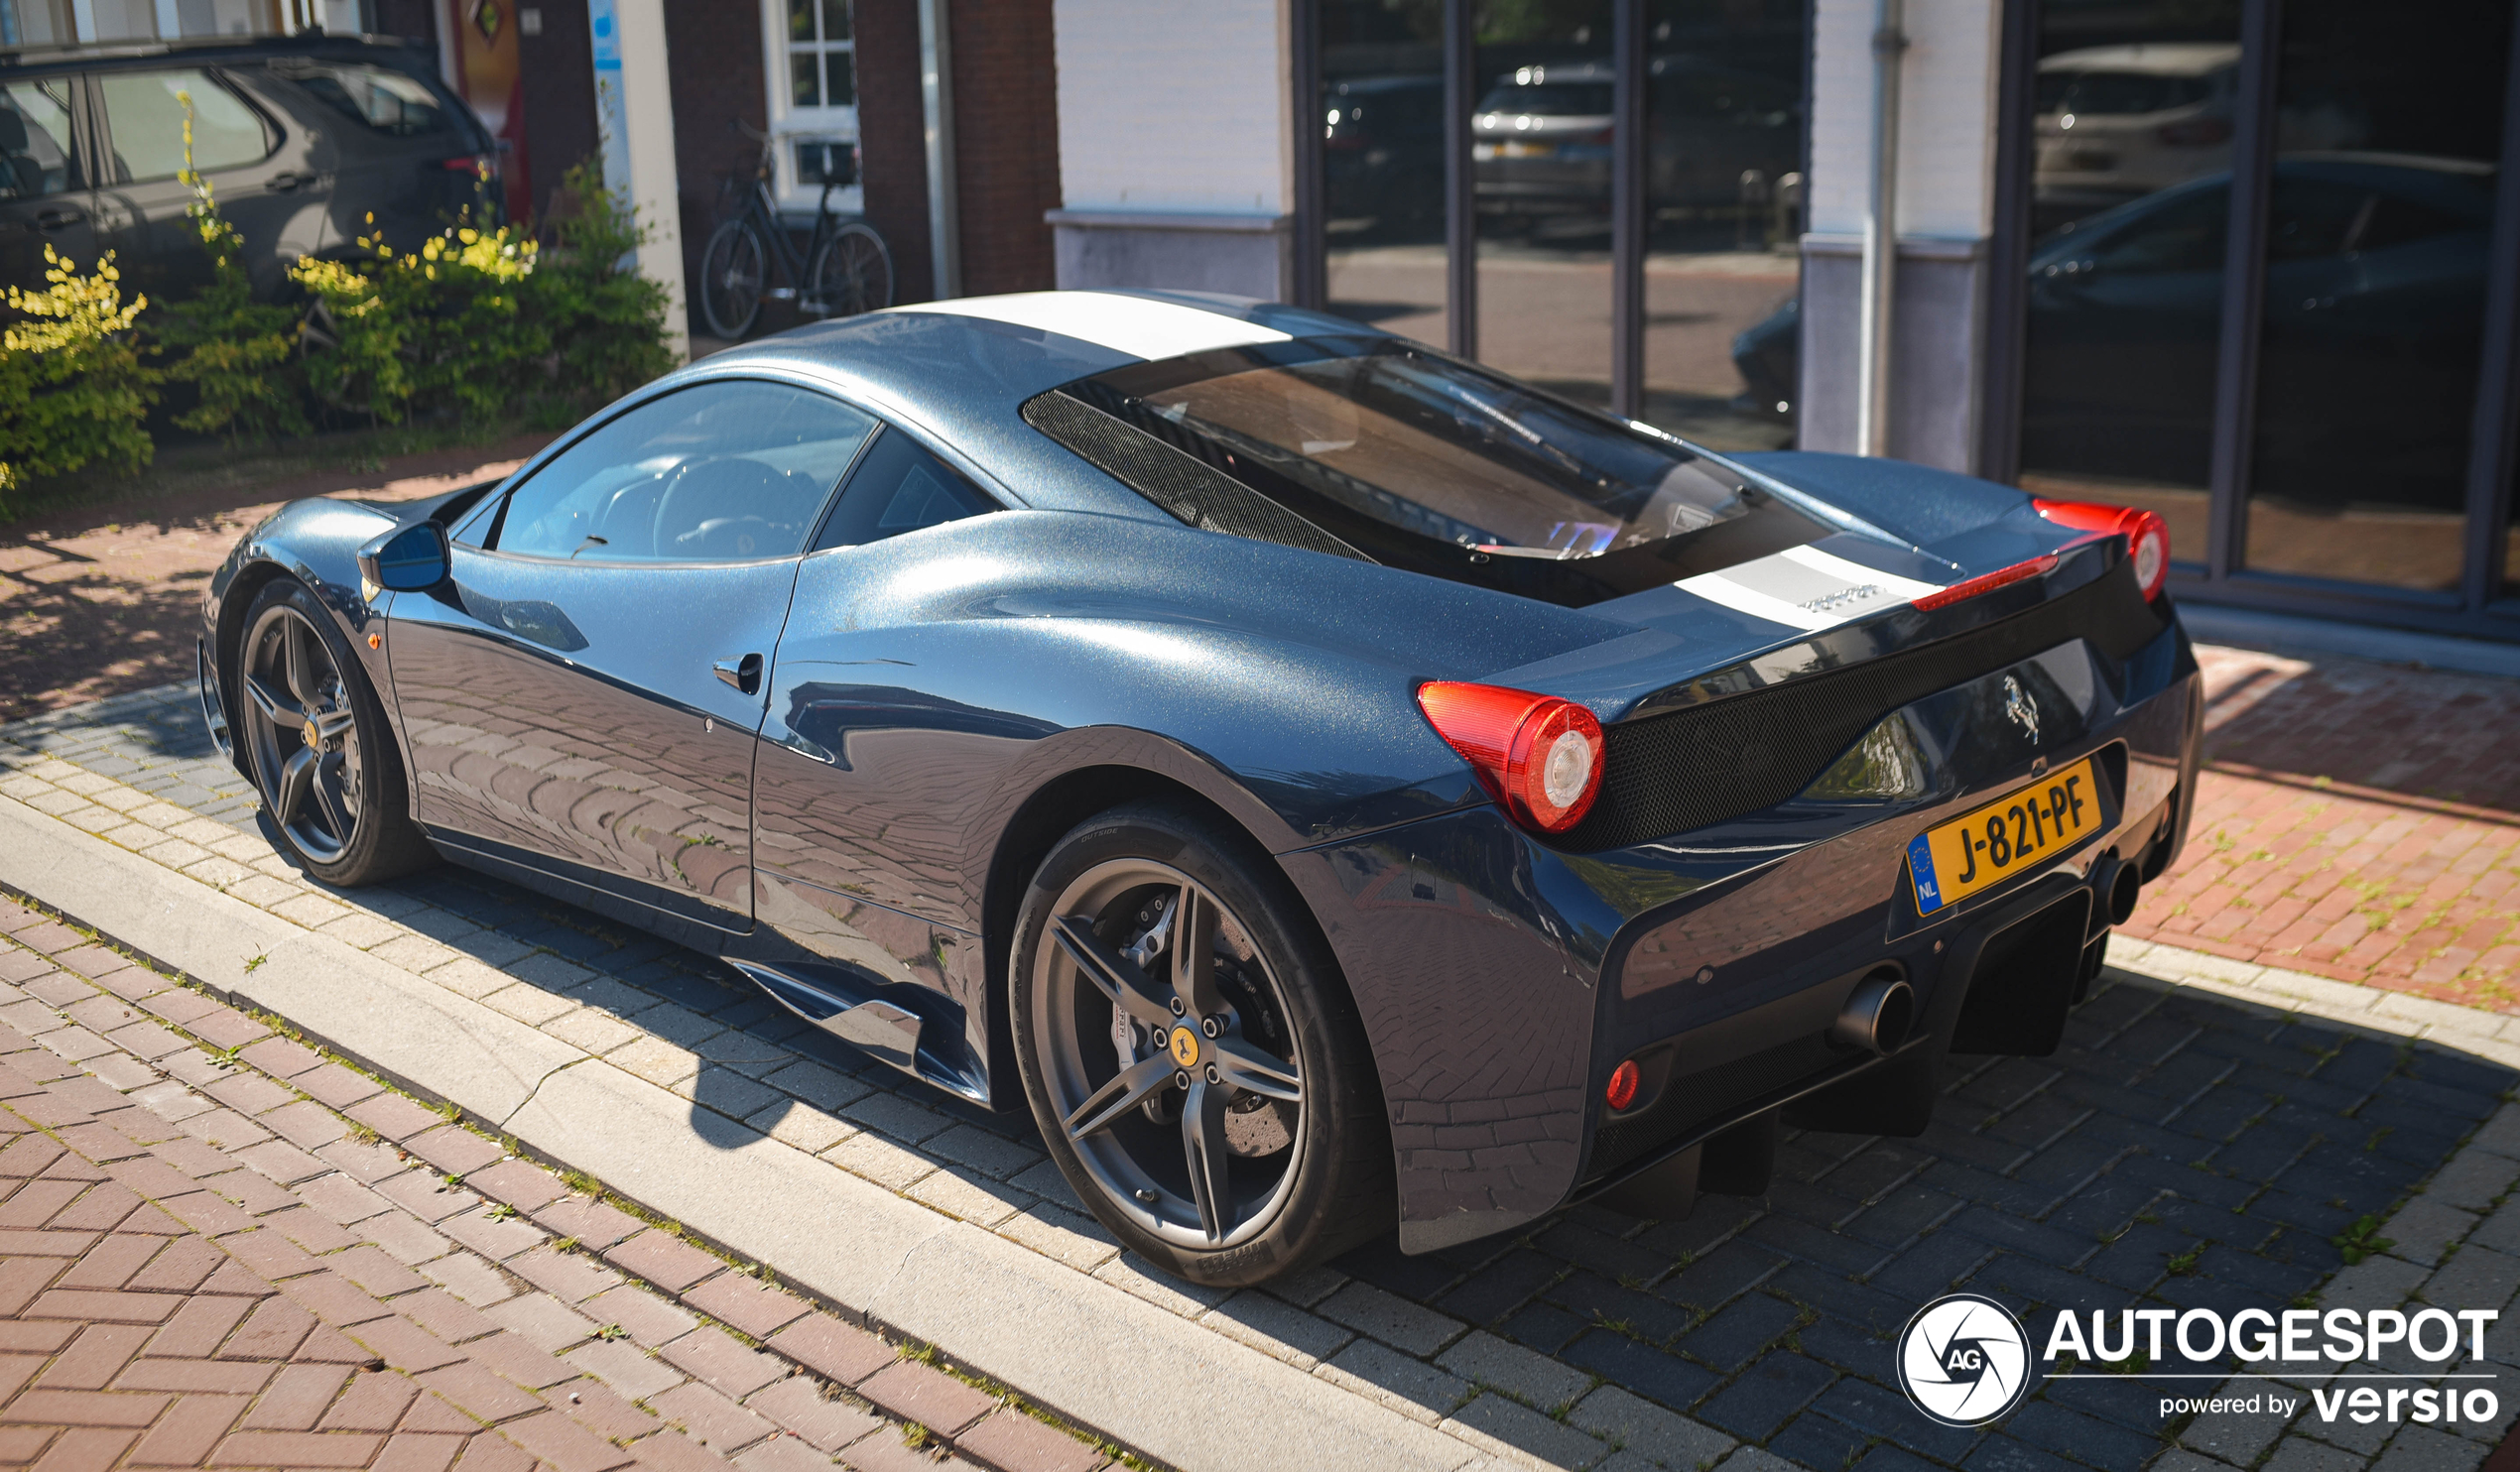 A beautiful 458 Speciale shows up in Oud-Loosdrecht.